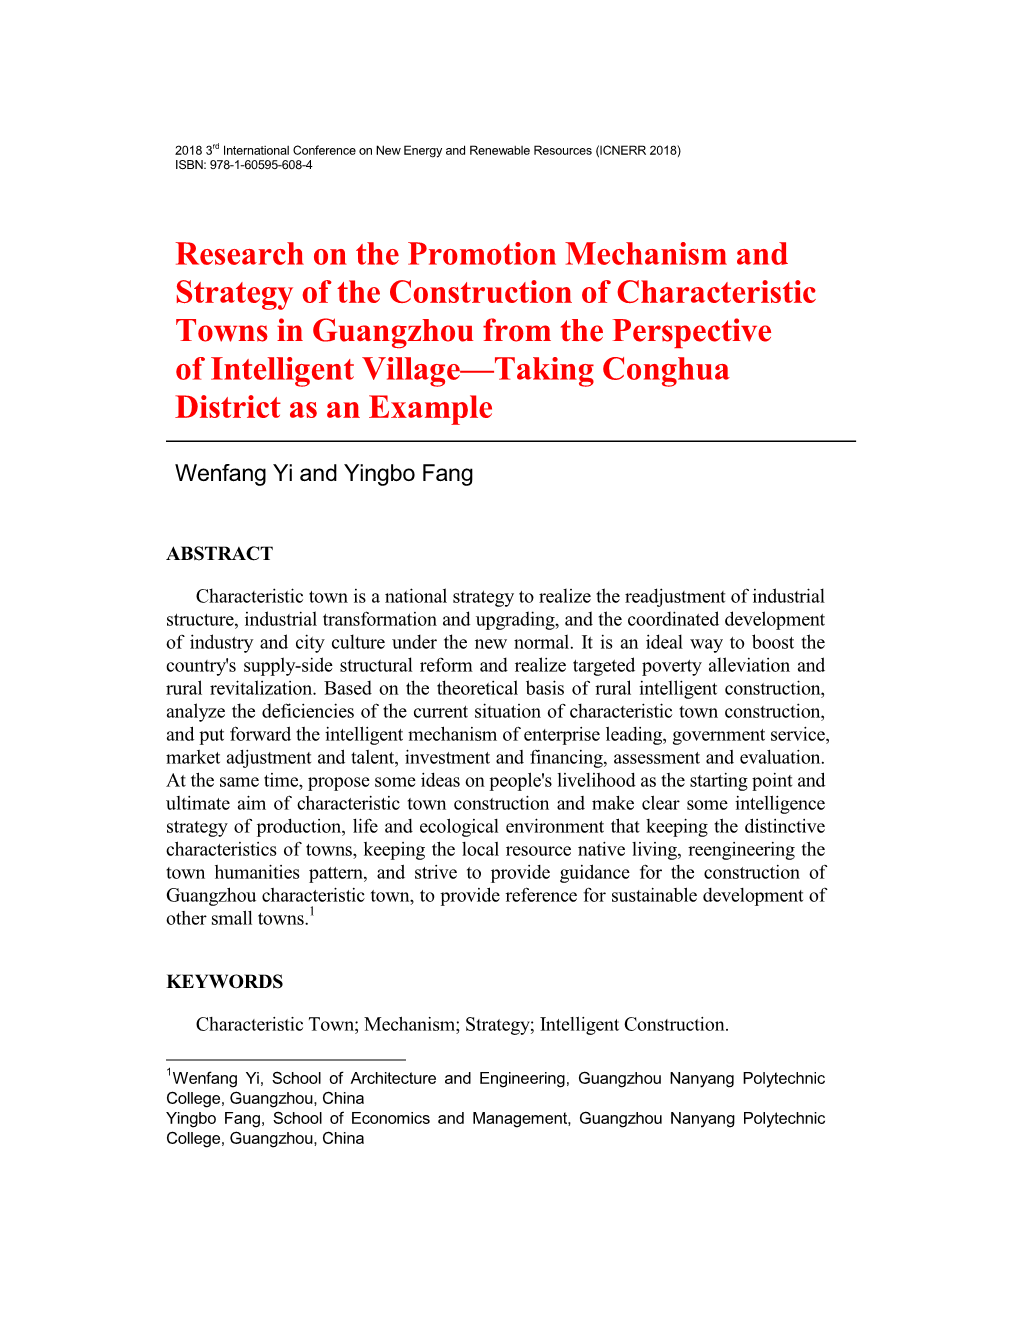 Research on the Promotion Mechanism and Strategy of the Construction of Characteristic Towns in Guangzhou from the Perspective of Intelligent Village—Taking Conghua